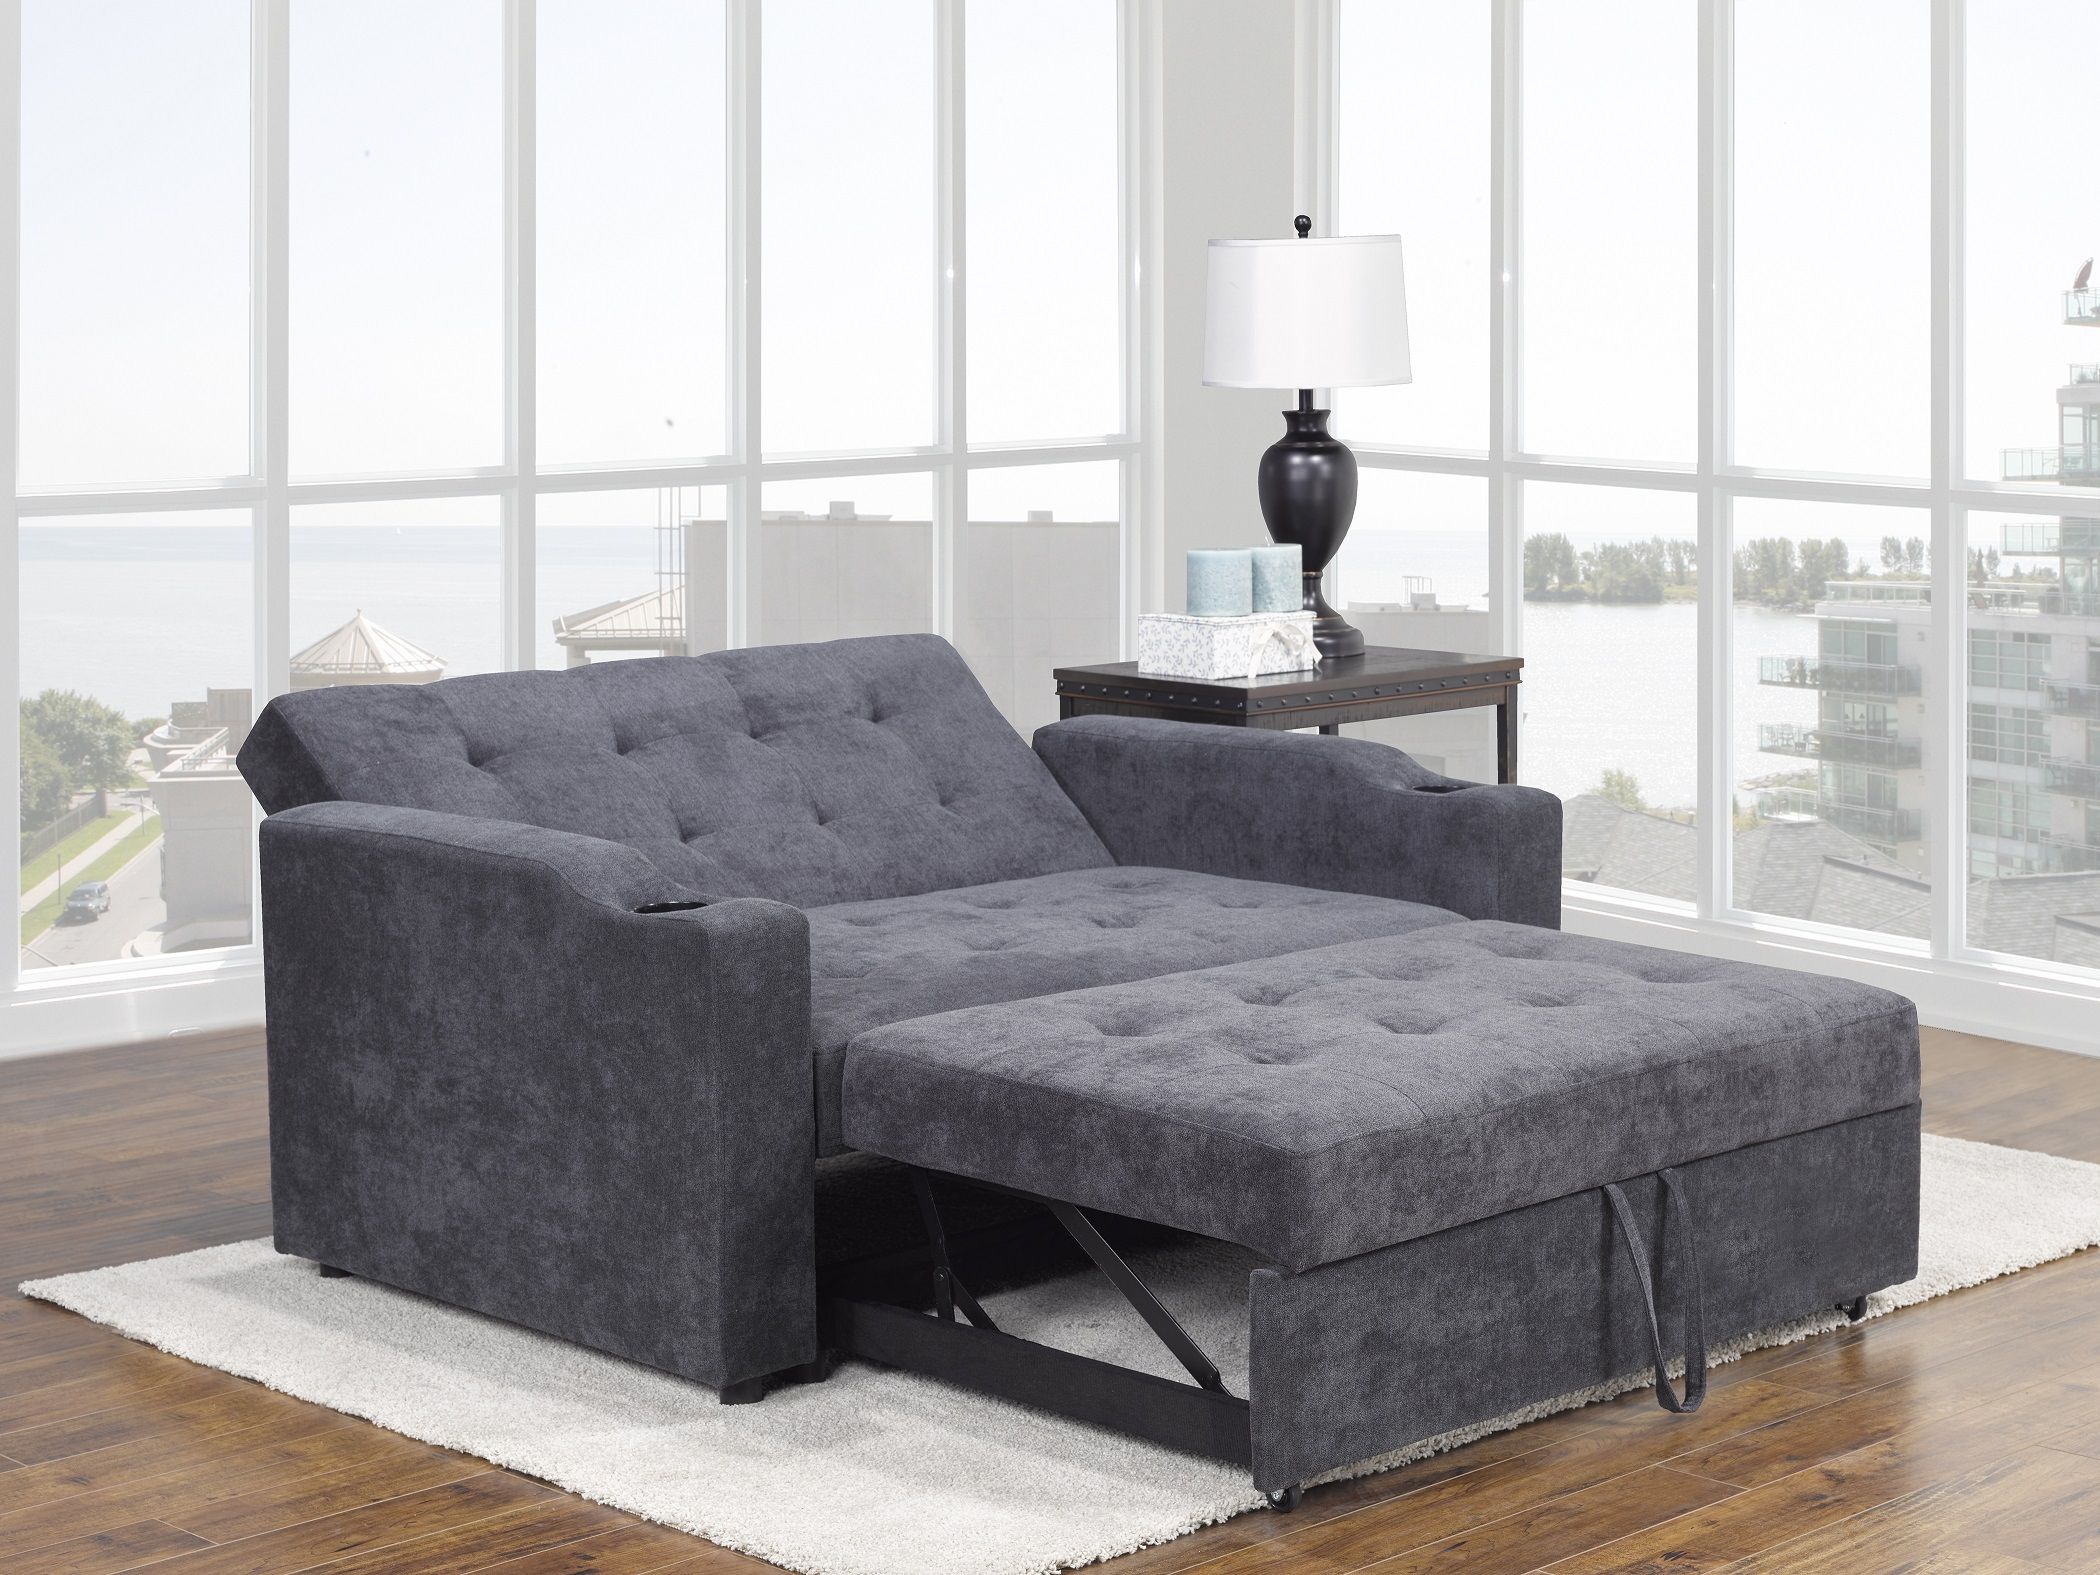 Brassex 2816 1 Dgy Sofa W. Pull Out Bed Dark Grey – Furniture Trends Within 2 In 1 Gray Pull Out Sofa Beds (Gallery 16 of 20)